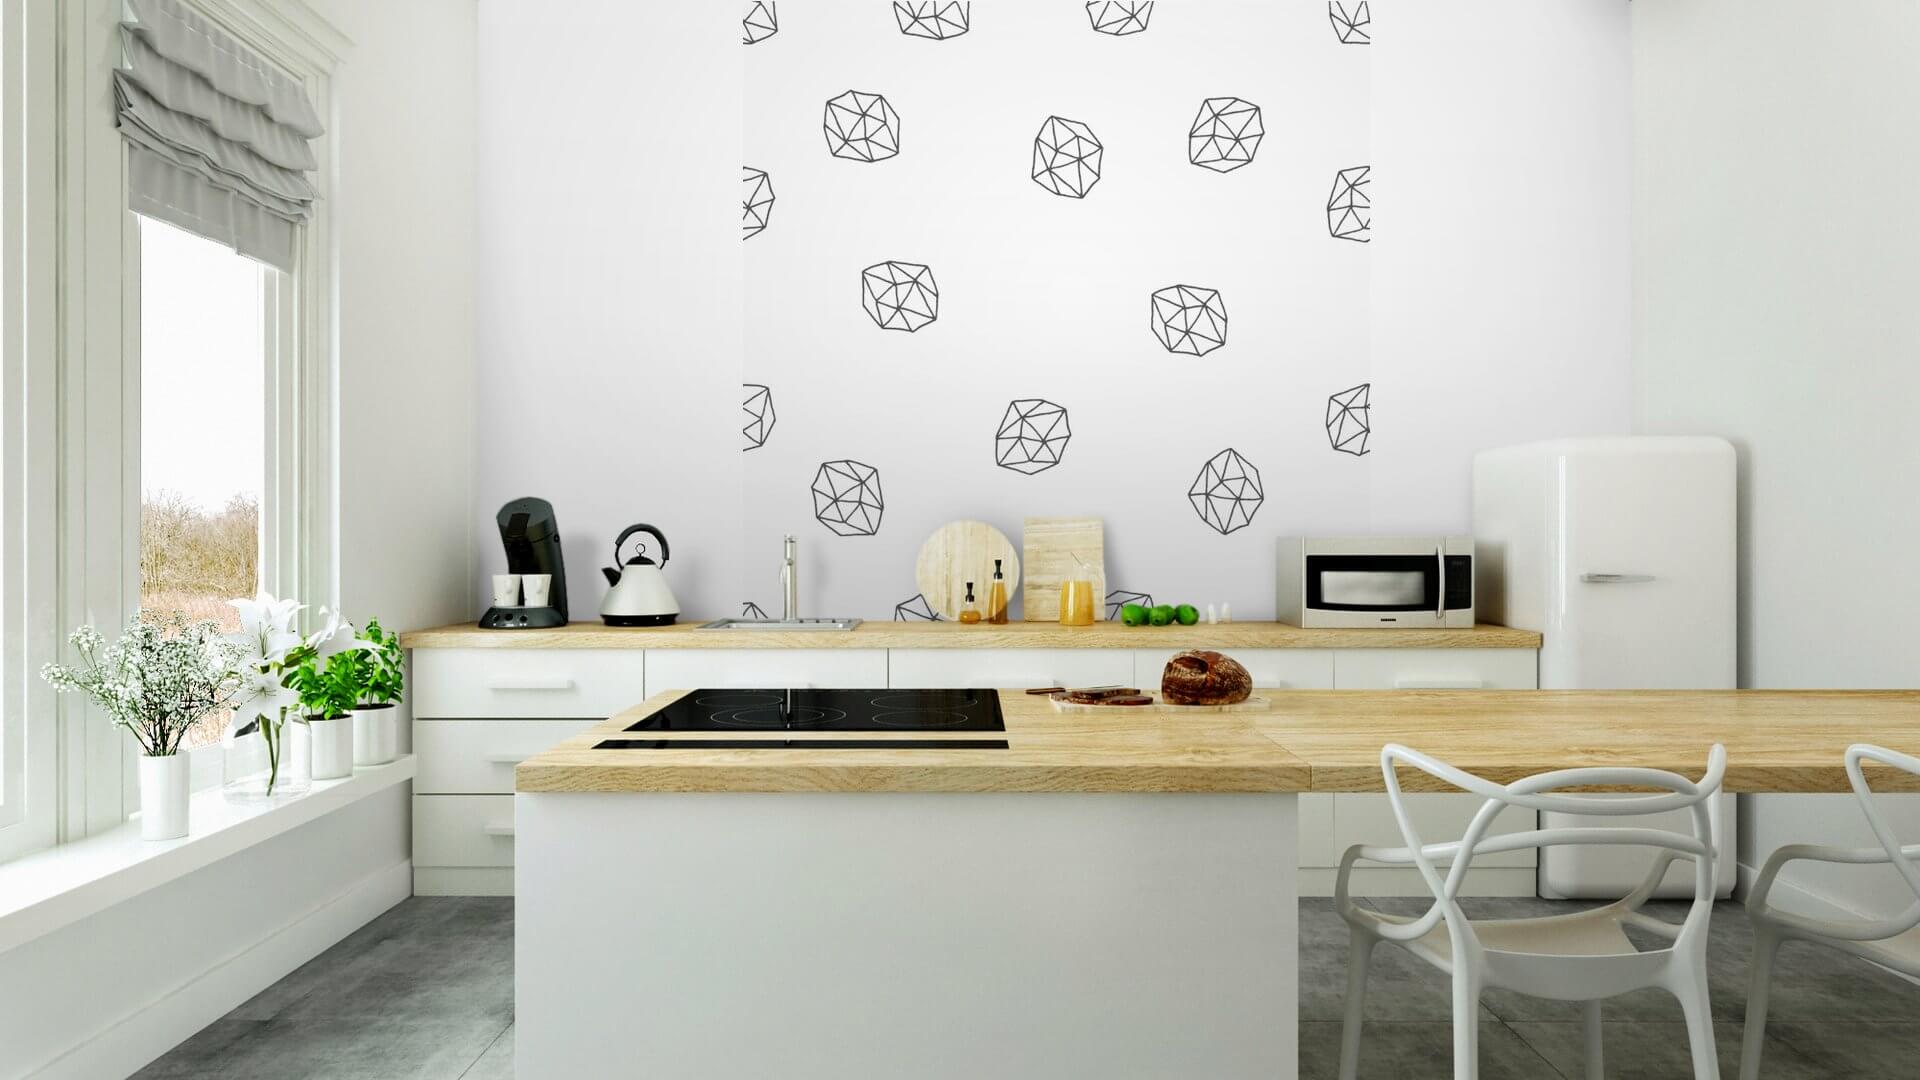 Beautiful Pixers wall mural. Check out the post for our tip on scoring 35% off your first order! #interiordesign #homedesign #wallmurals #walldecals #wallpapers